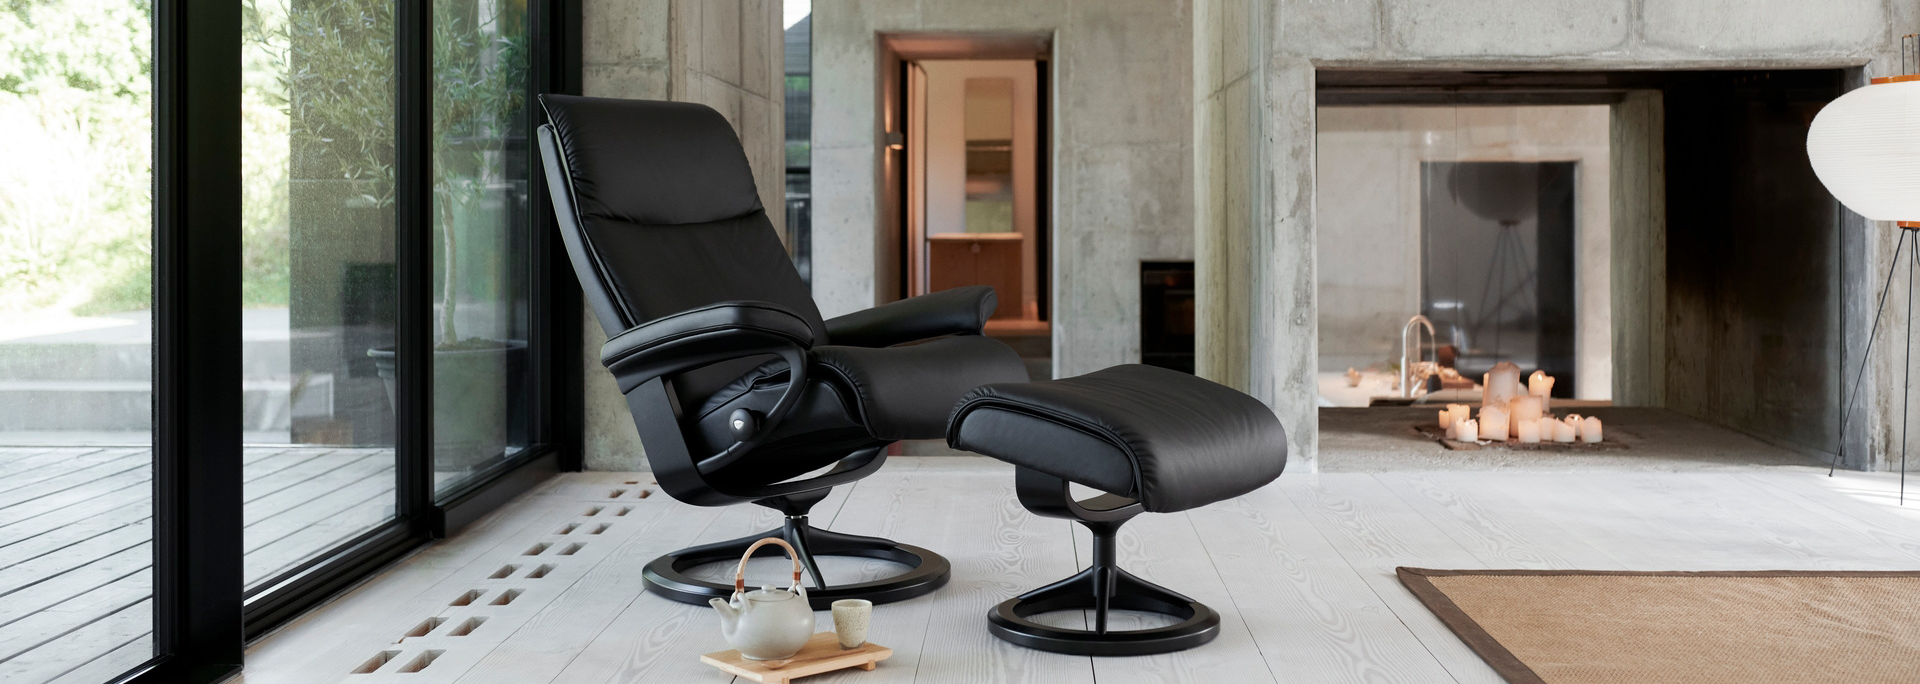 Stressless Signature Base Recliners